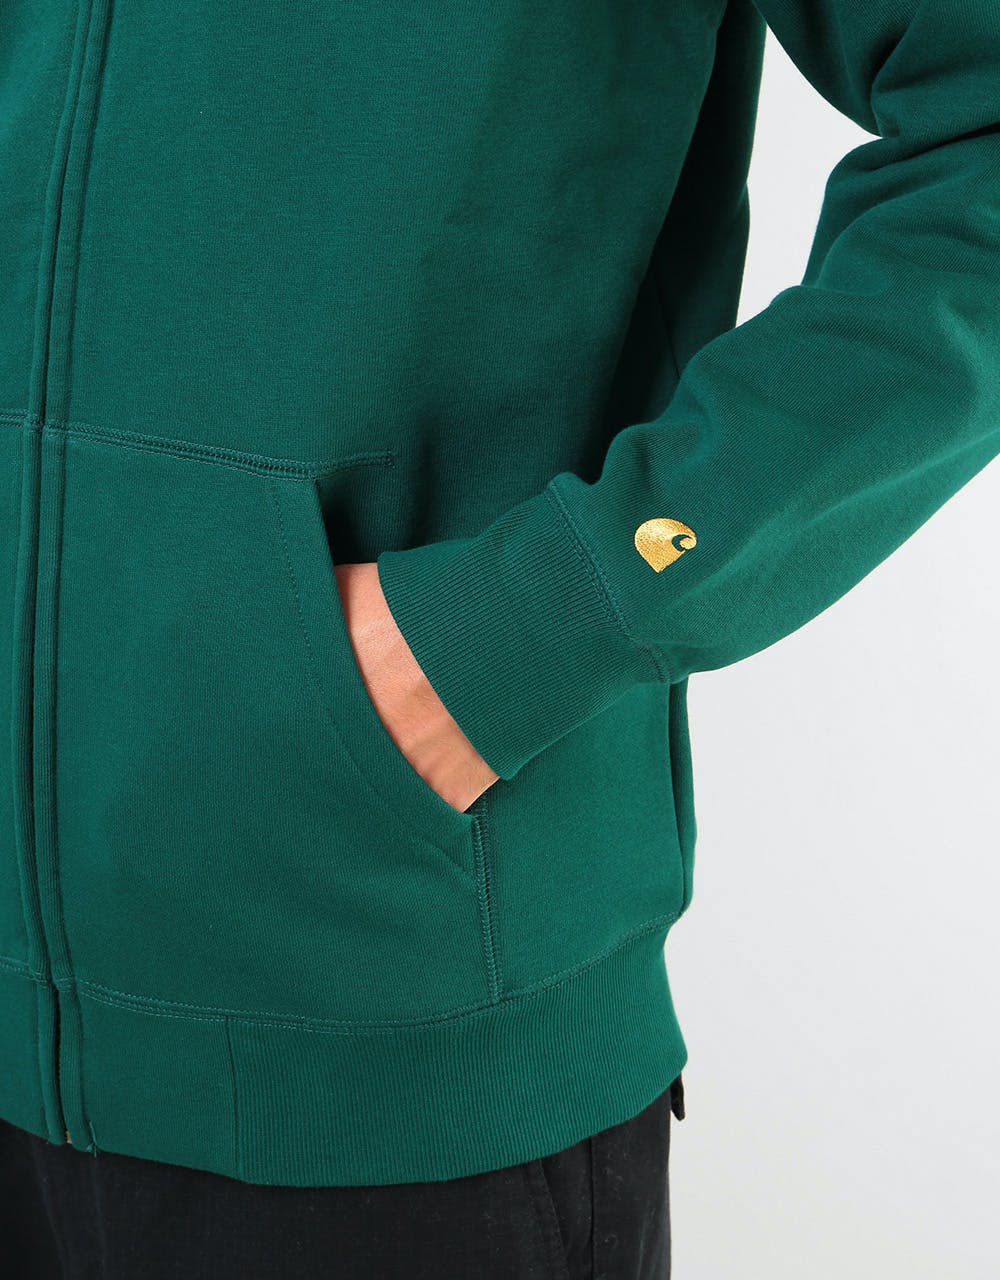 Carhartt WIP Hooded Chase Jacket - Fir/Gold